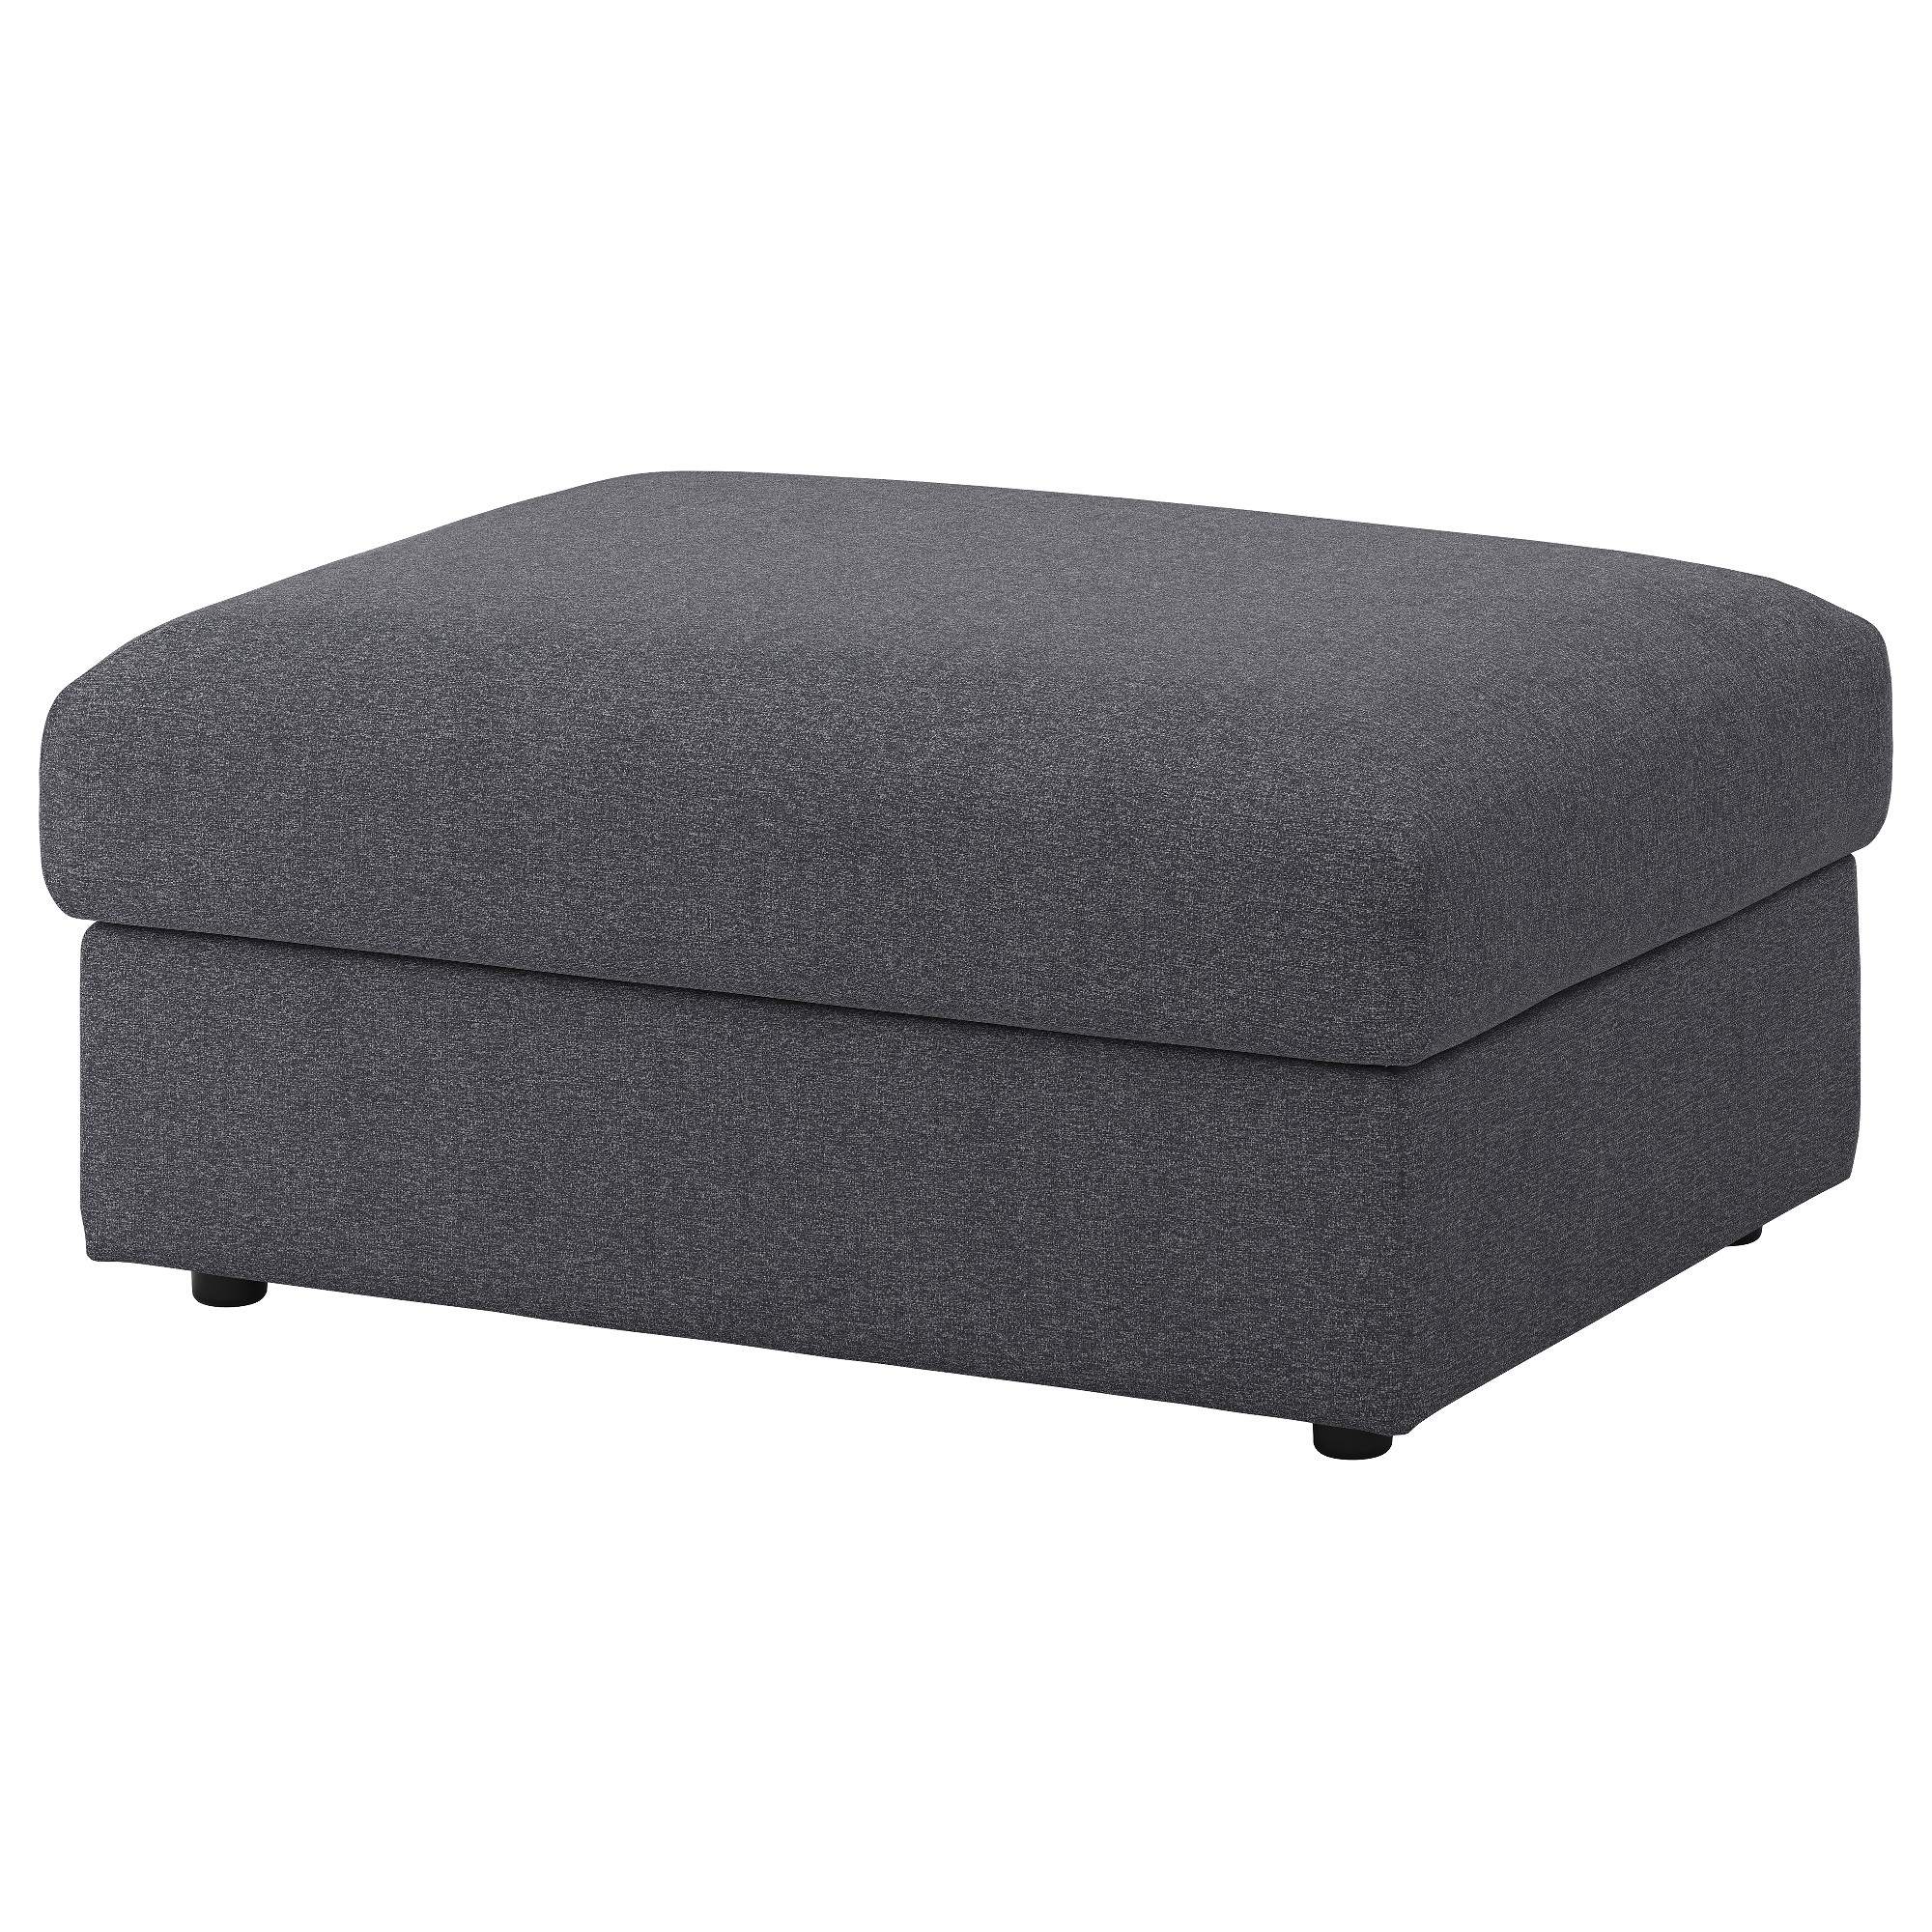 VIMLE cover for footstool with storage